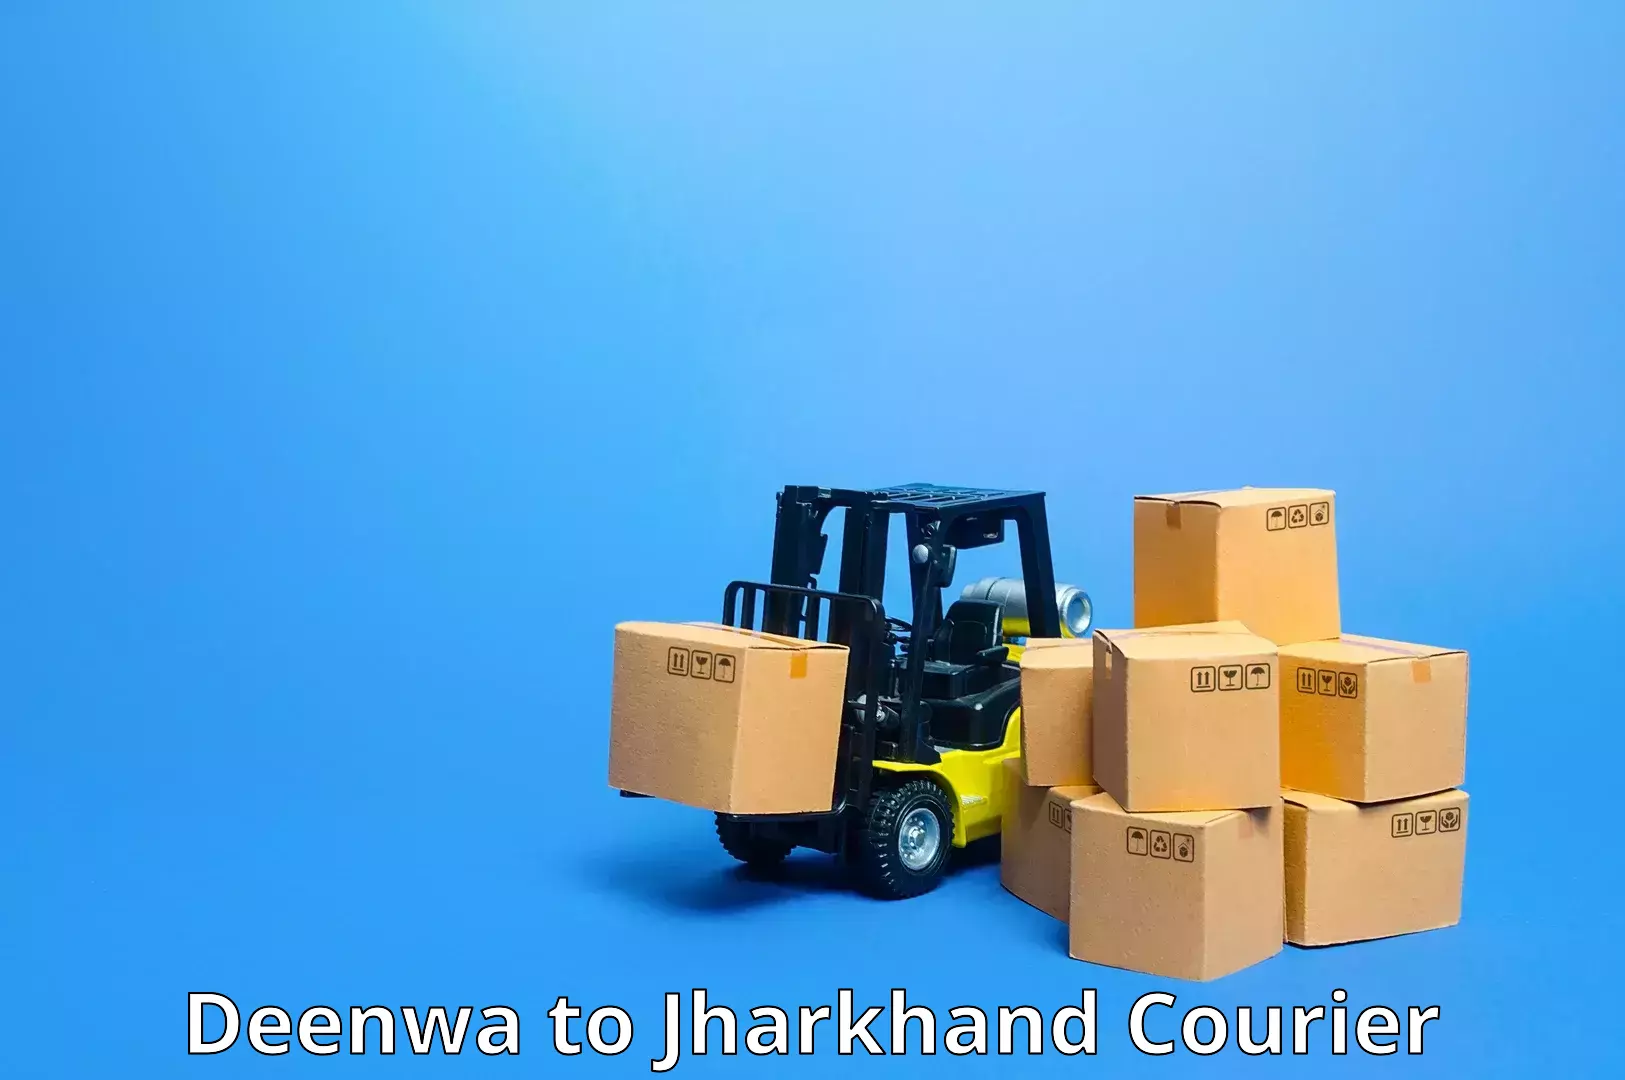 Efficient parcel tracking Deenwa to Peterbar